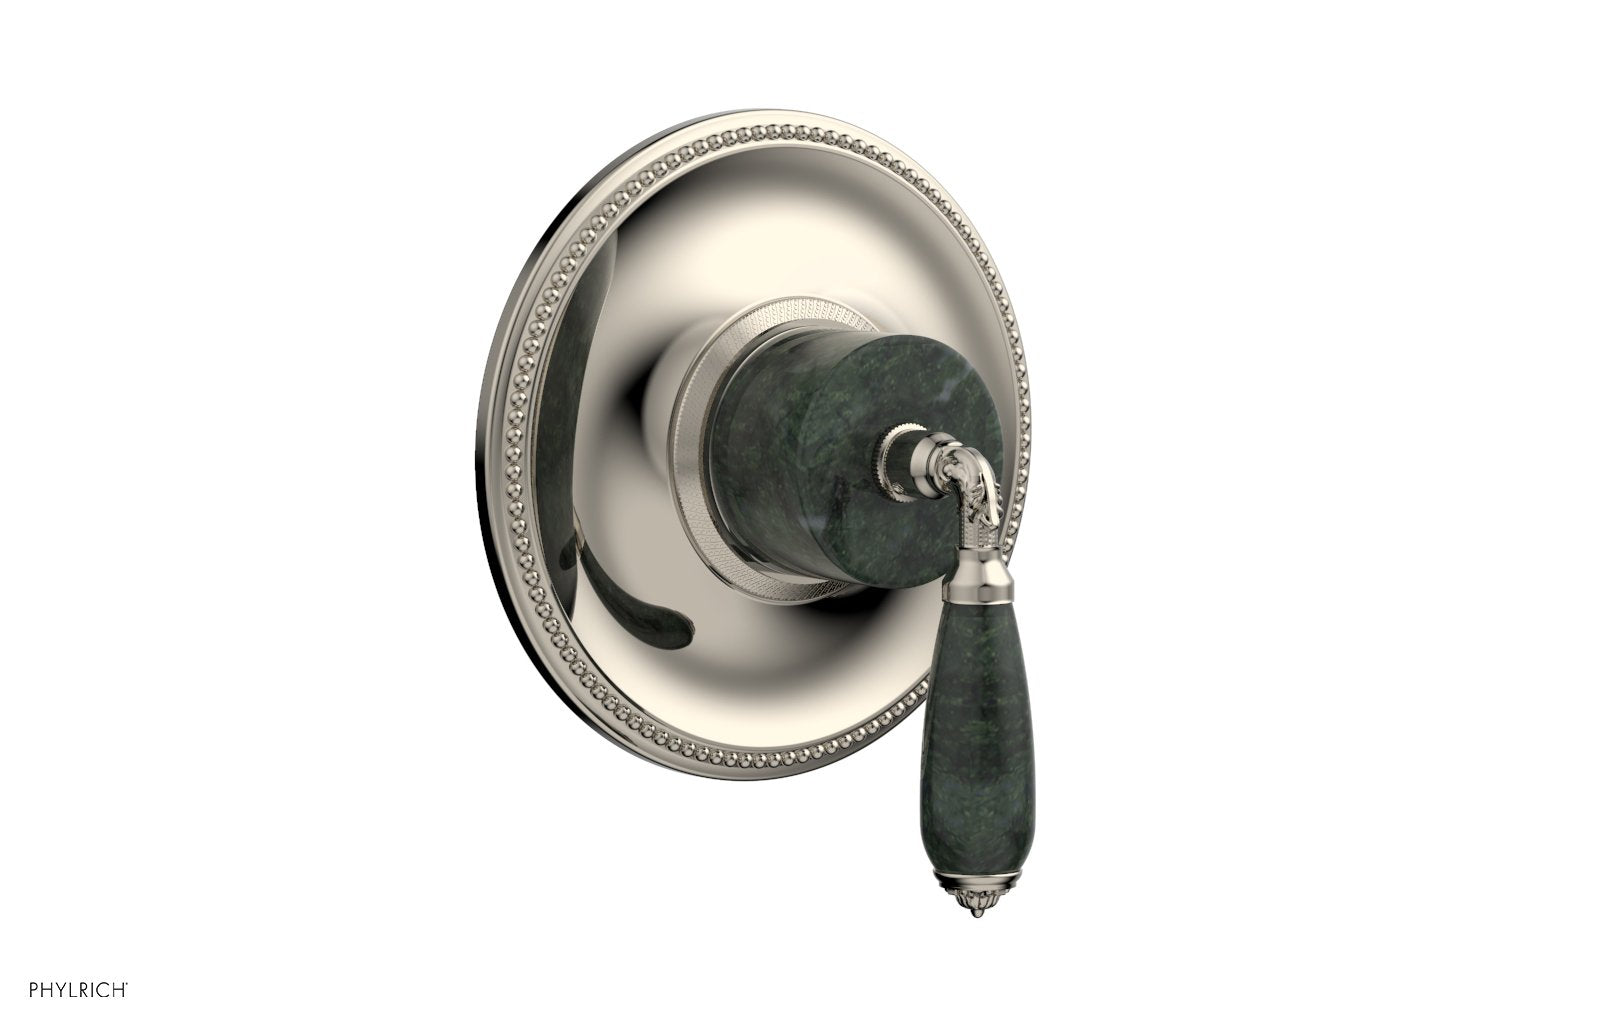 Phylrich VALENCIA Thermostatic Shower Trim, Green Marble Lever Handle